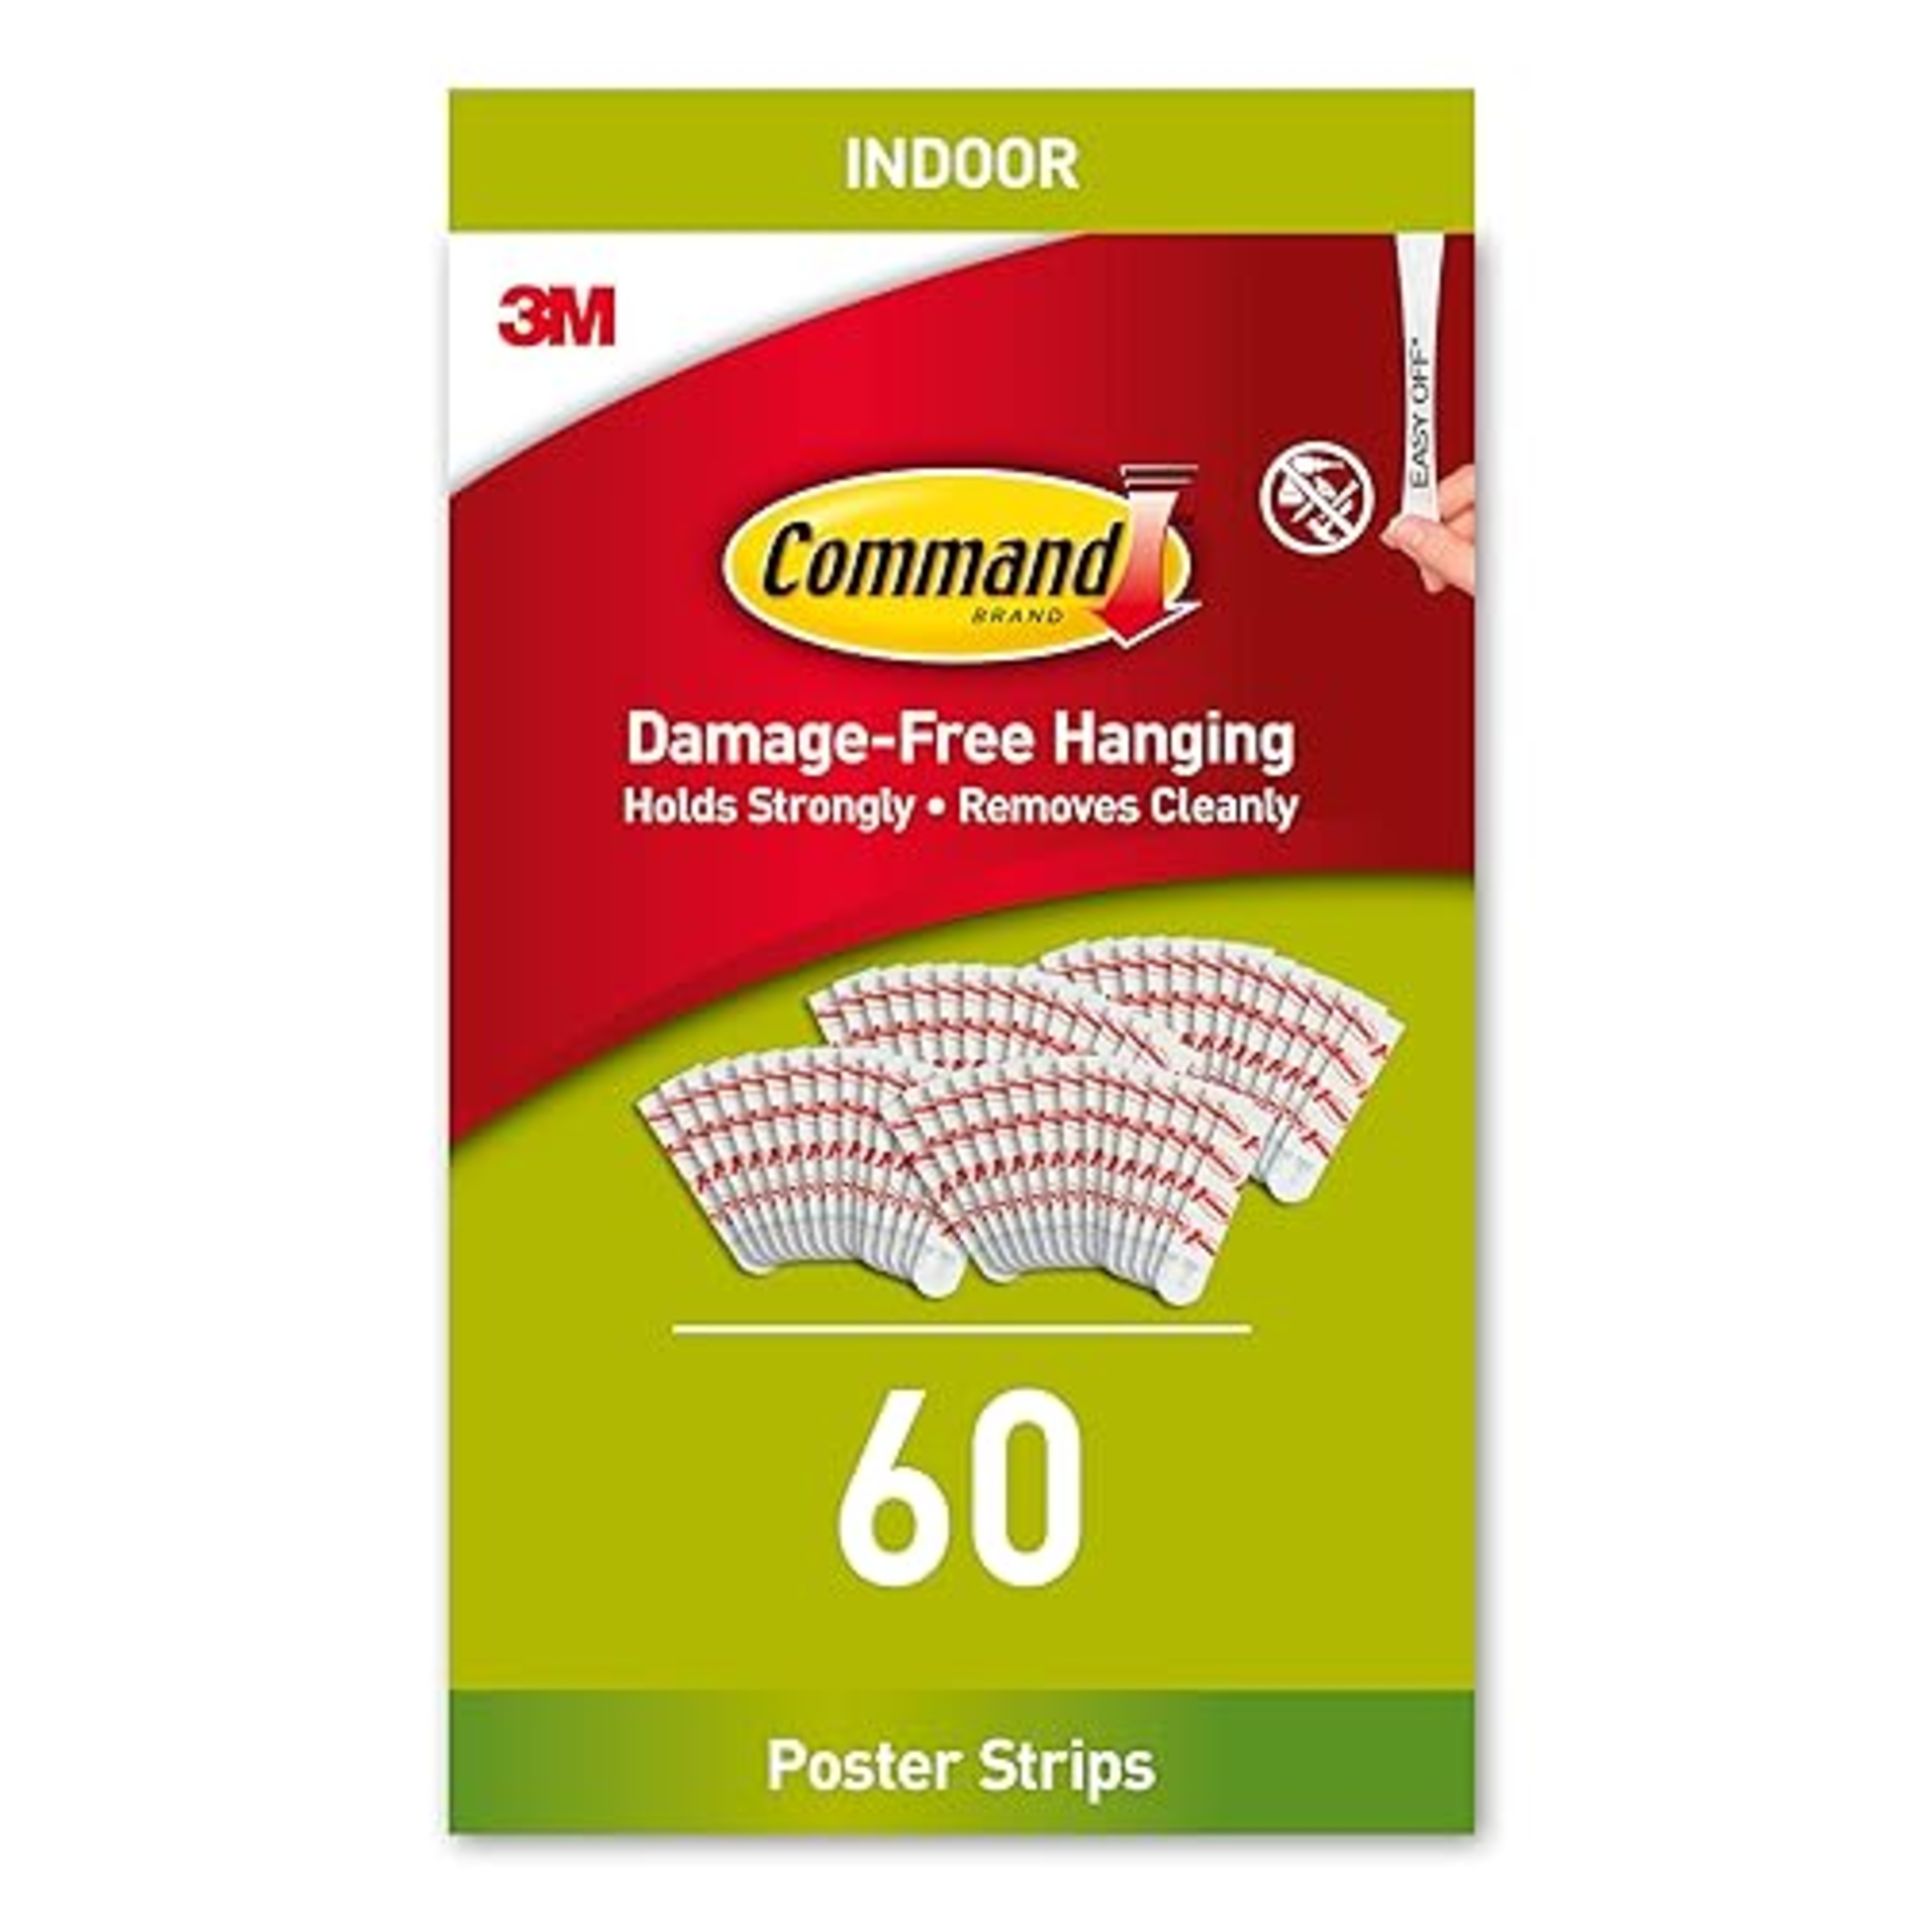 Command Poster Strips, Value Pack, 60 Adhesive Strips, White - Ideal for Hanging Posters, Schedules